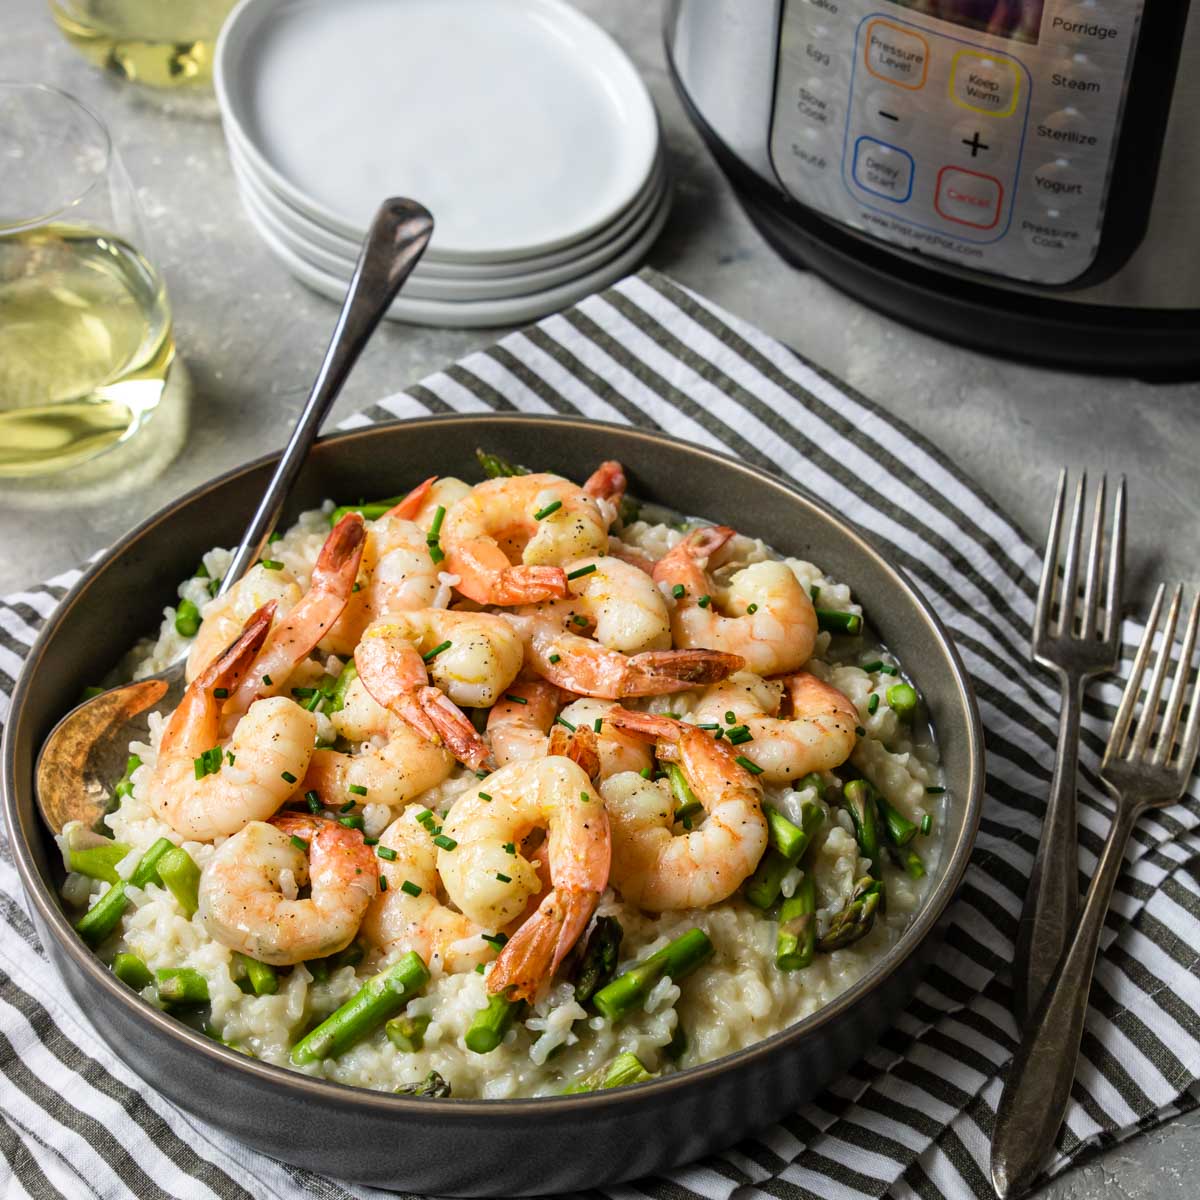 Instant Pot Shrimp Risotto in a bowl with an Instant Pot on the counter